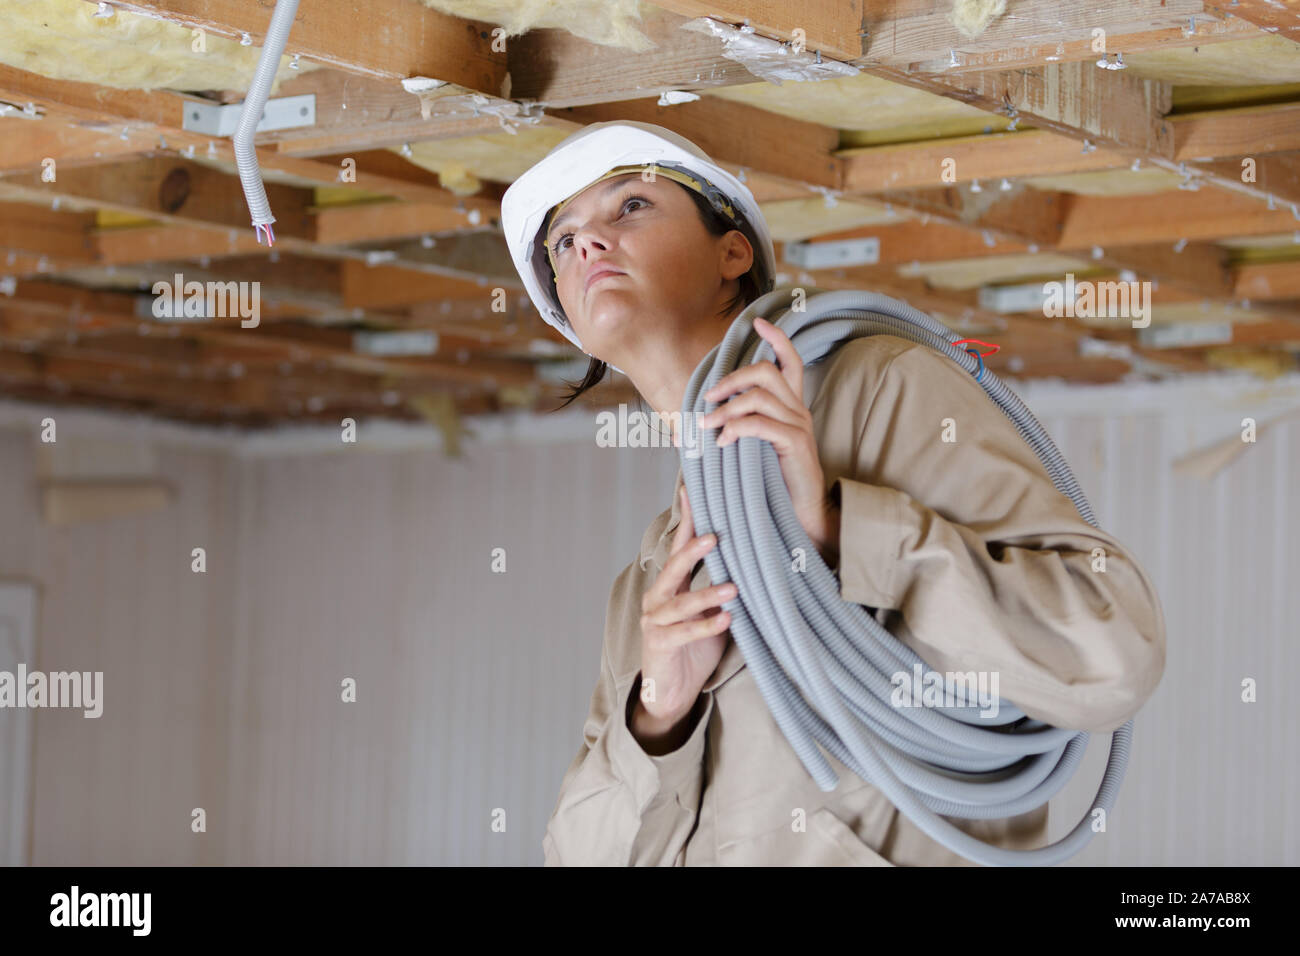 female worker fitting ventilation pipes Stock Photo